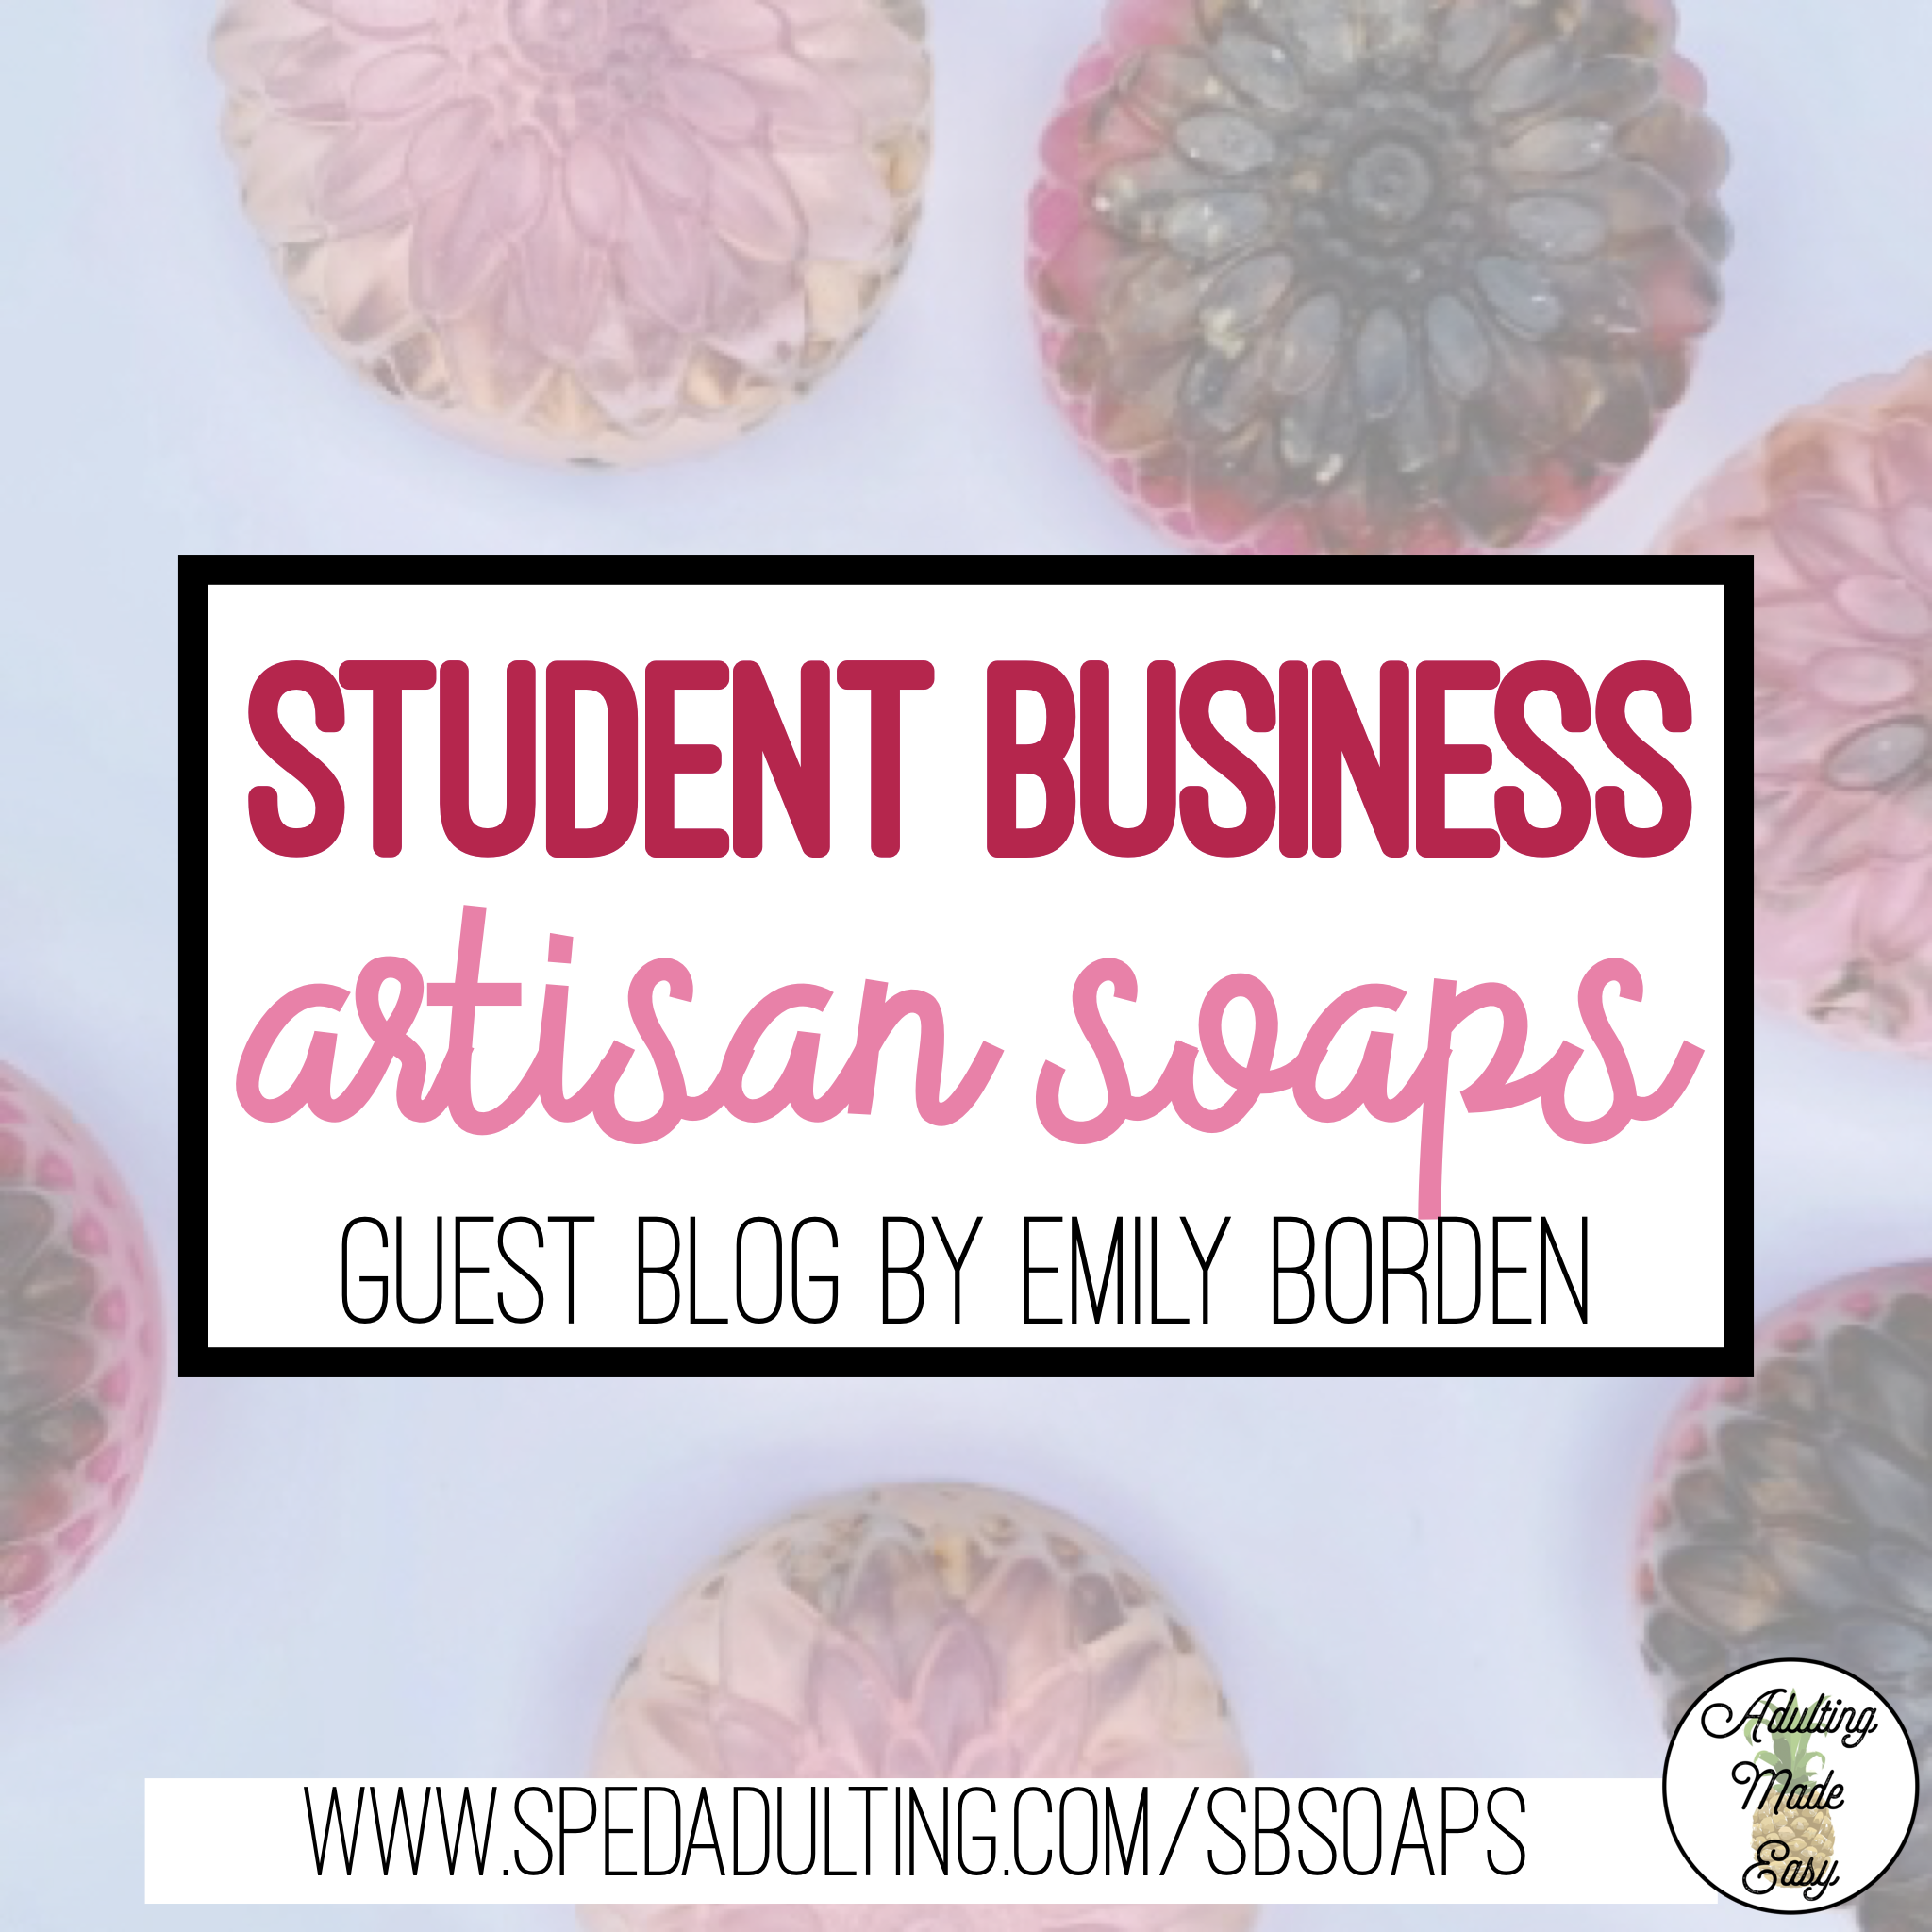 BLOG: Classroom Student Business selling artisanal soaps in special education